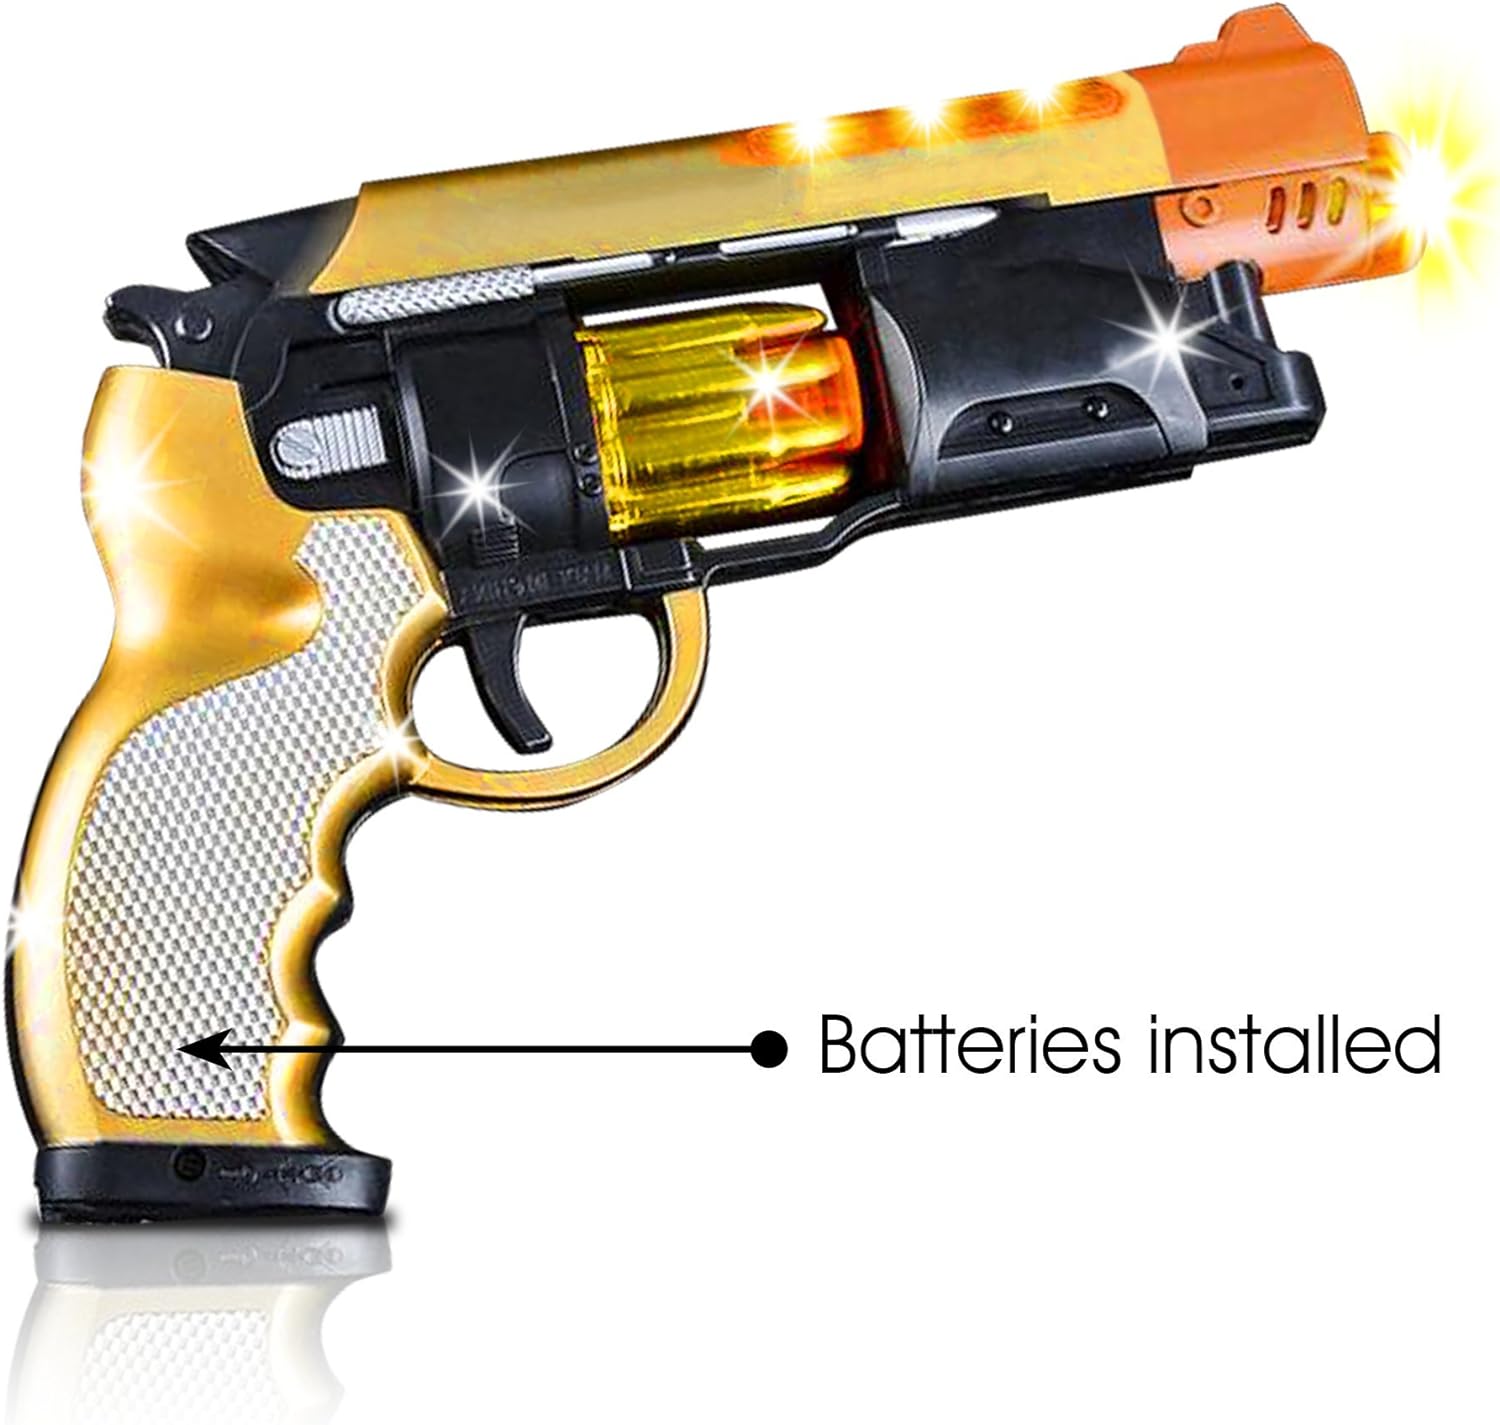 ArtCreativity Blade Runner Airsoft Toy Pistol Toy Gun for Kids with LED and Sound Effect, Design, Batteries Included, Sturdy Plastic Design, Great Gift Idea for Girls and Boys - 1 Pistol